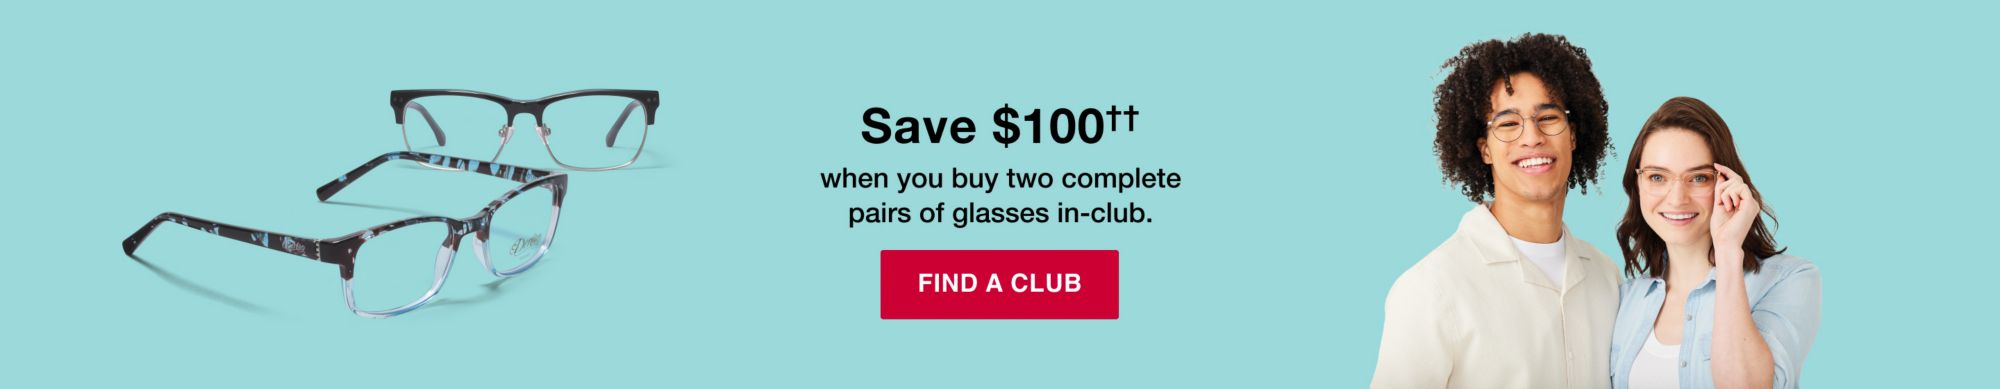 BJ's Optical. Save $100†† when you buy two complete pairs of glasses in-club. Click to find a club